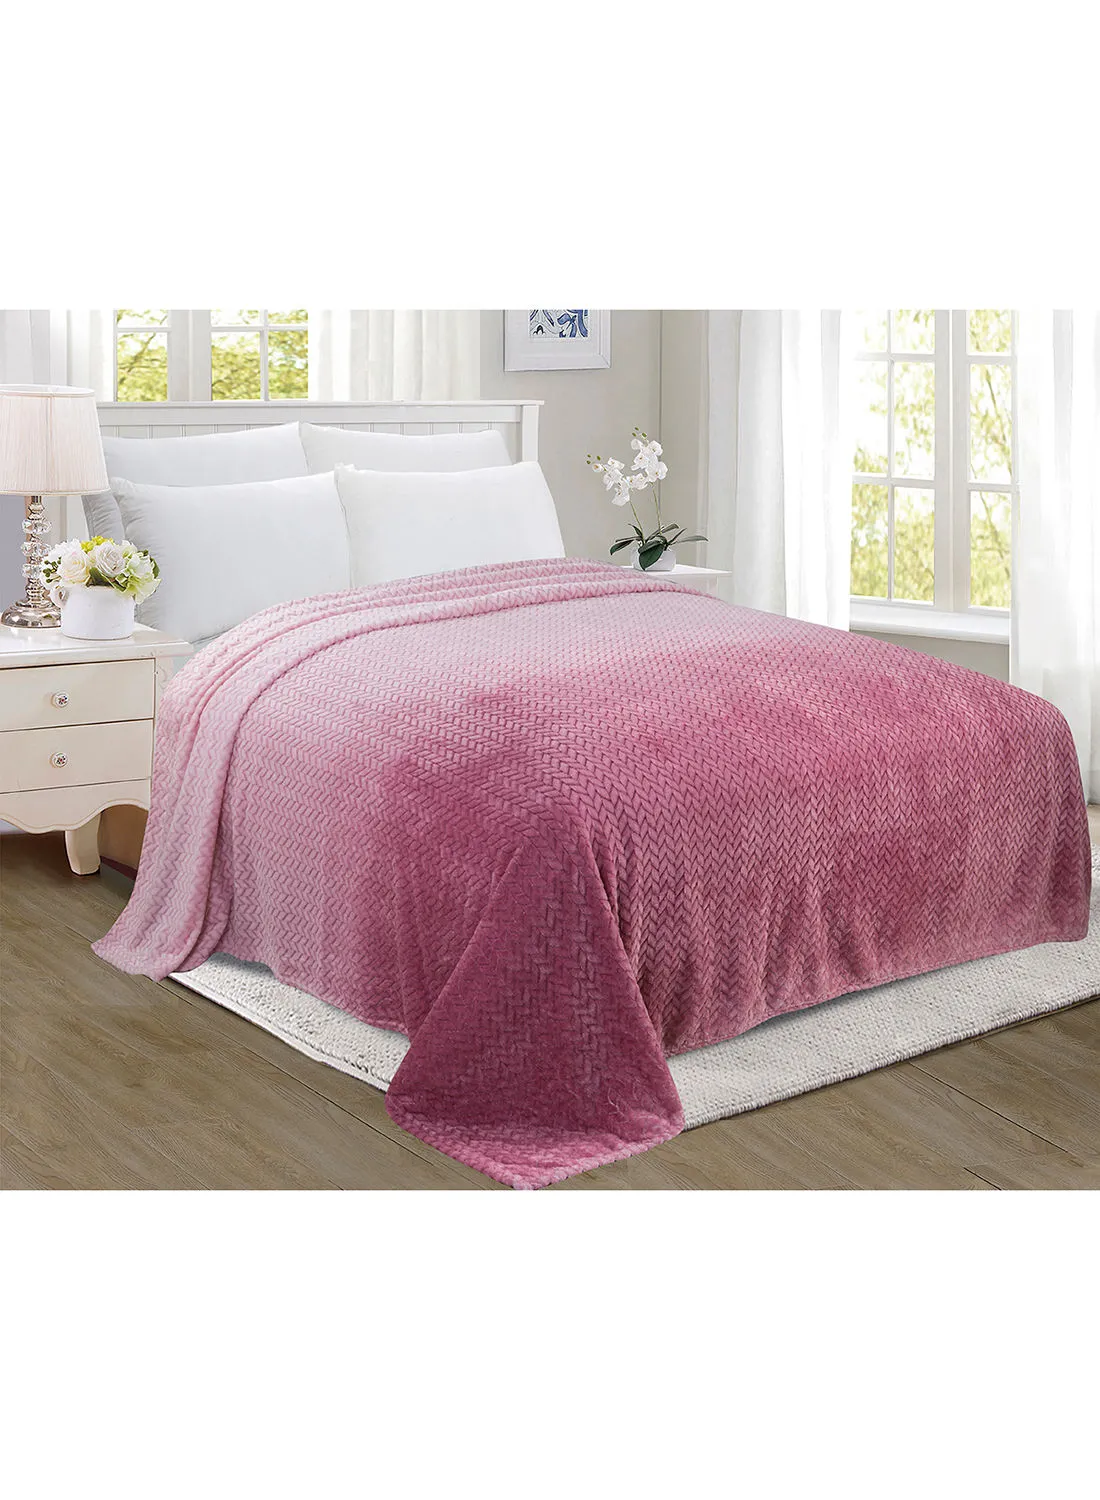 noon east Lightweight Summer Blanket King Size 280 GSM Jacquard Extra Soft Fleece All Season Blanket Bed And Sofa Throw  200 X 220 Cms Pink